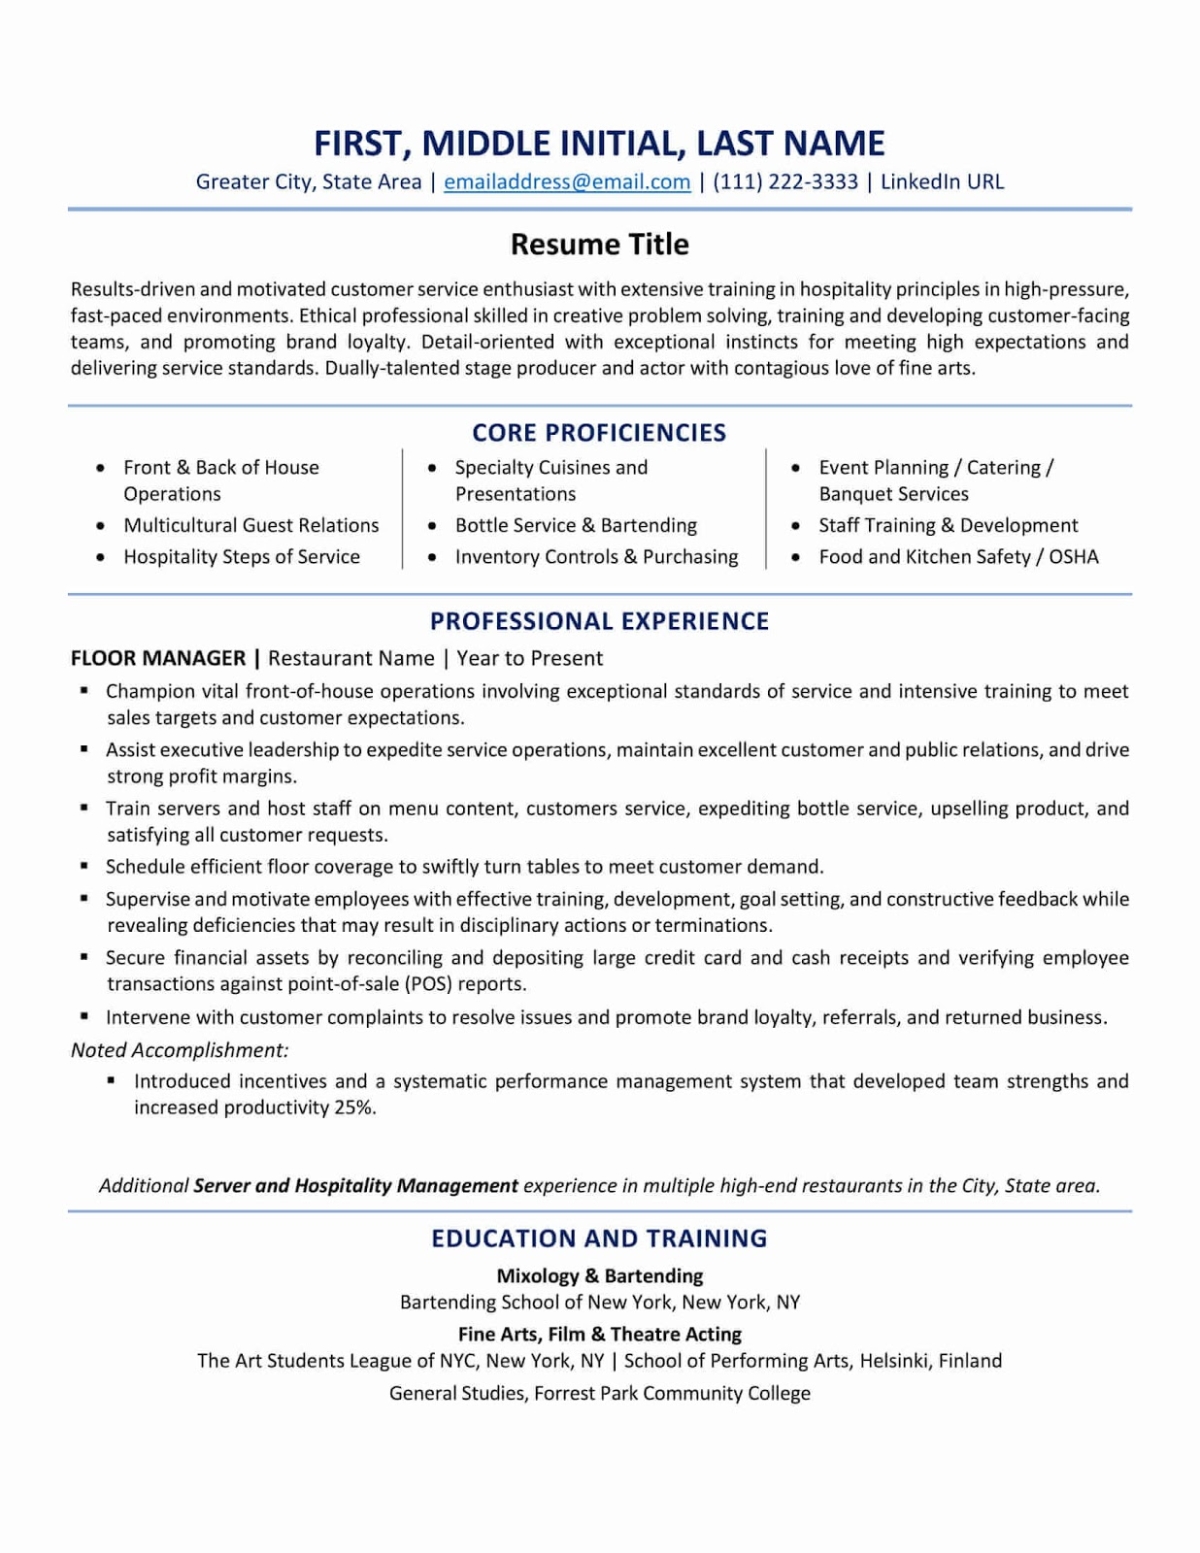 resume samples for part time jobs in canada